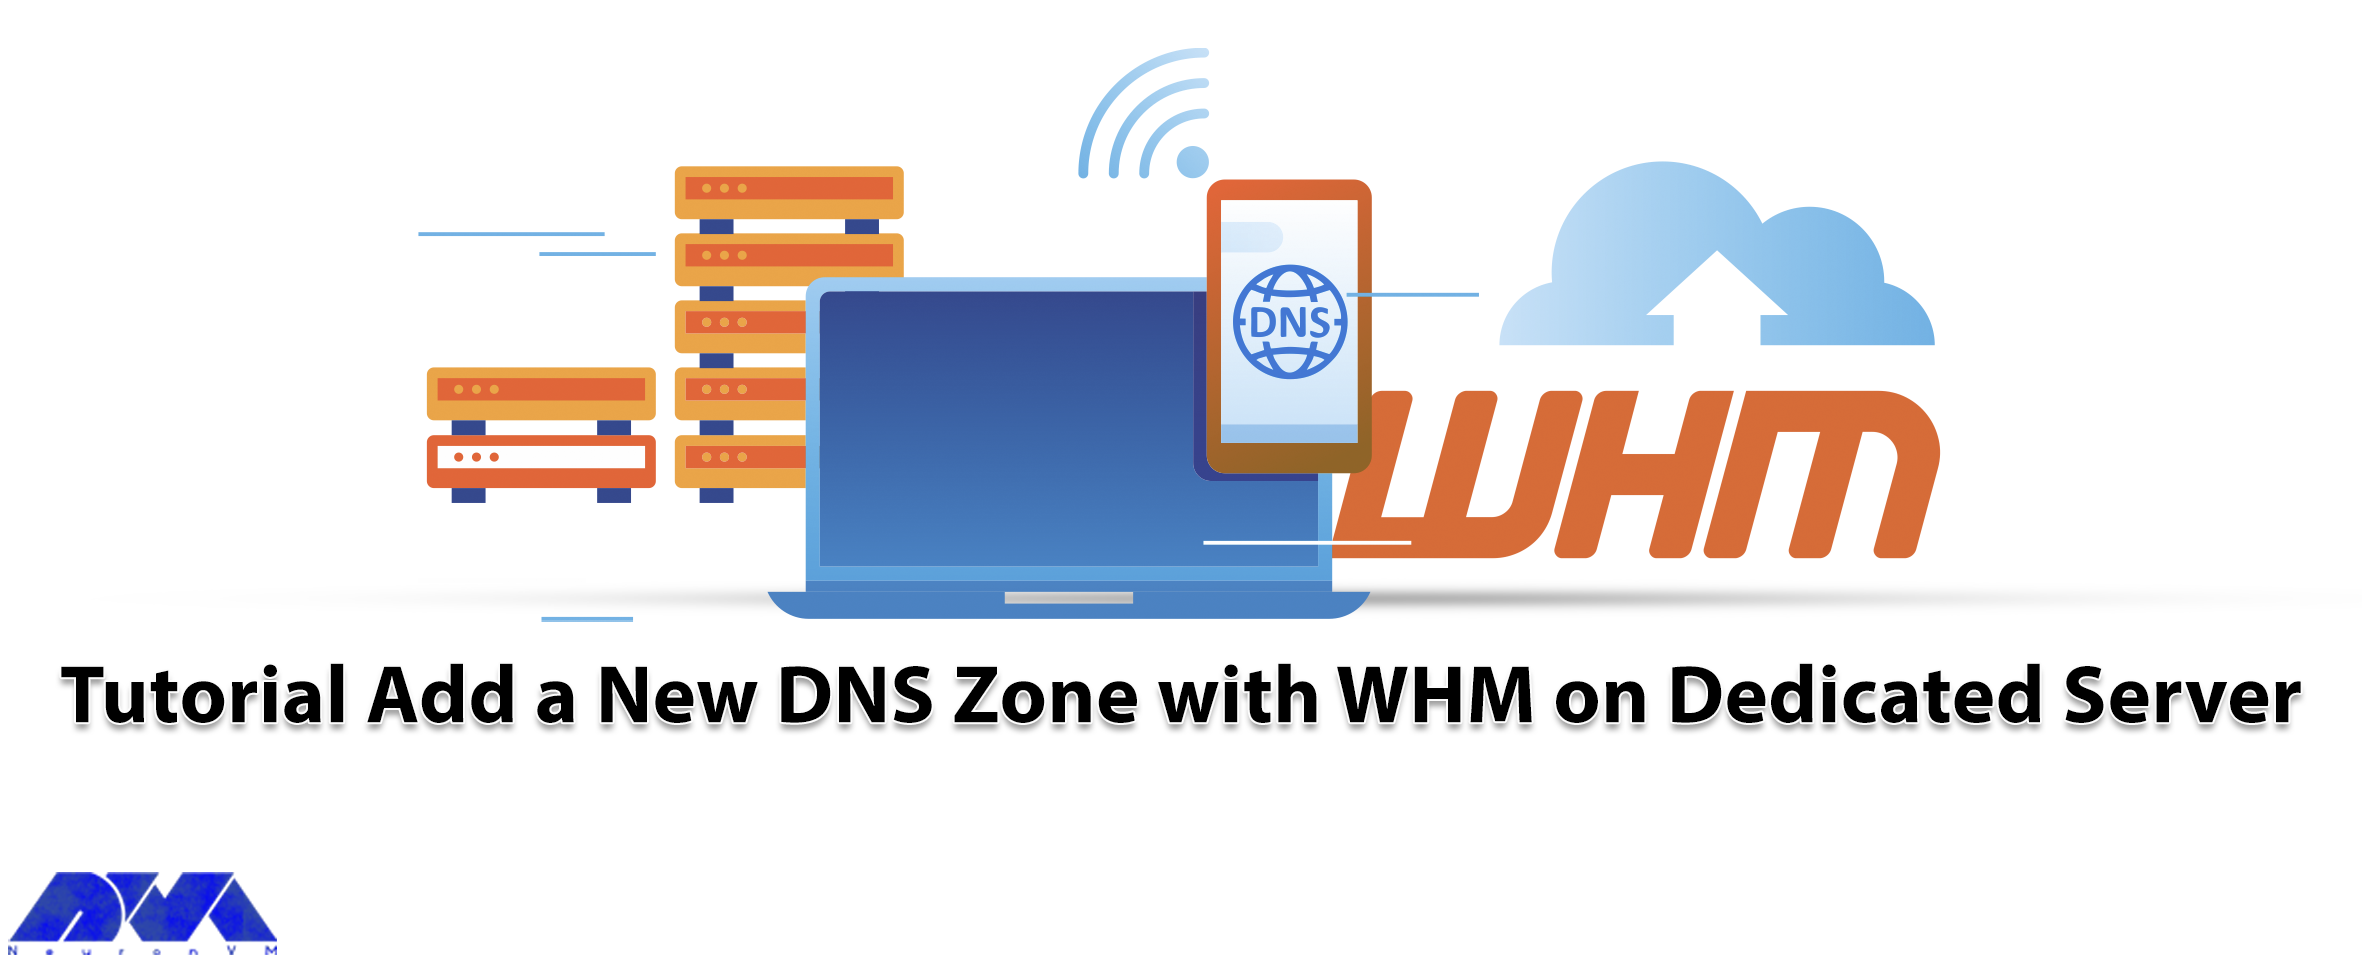 Tutorial Add a New DNS Zone with WHM on Dedicated Server - NeuronVM